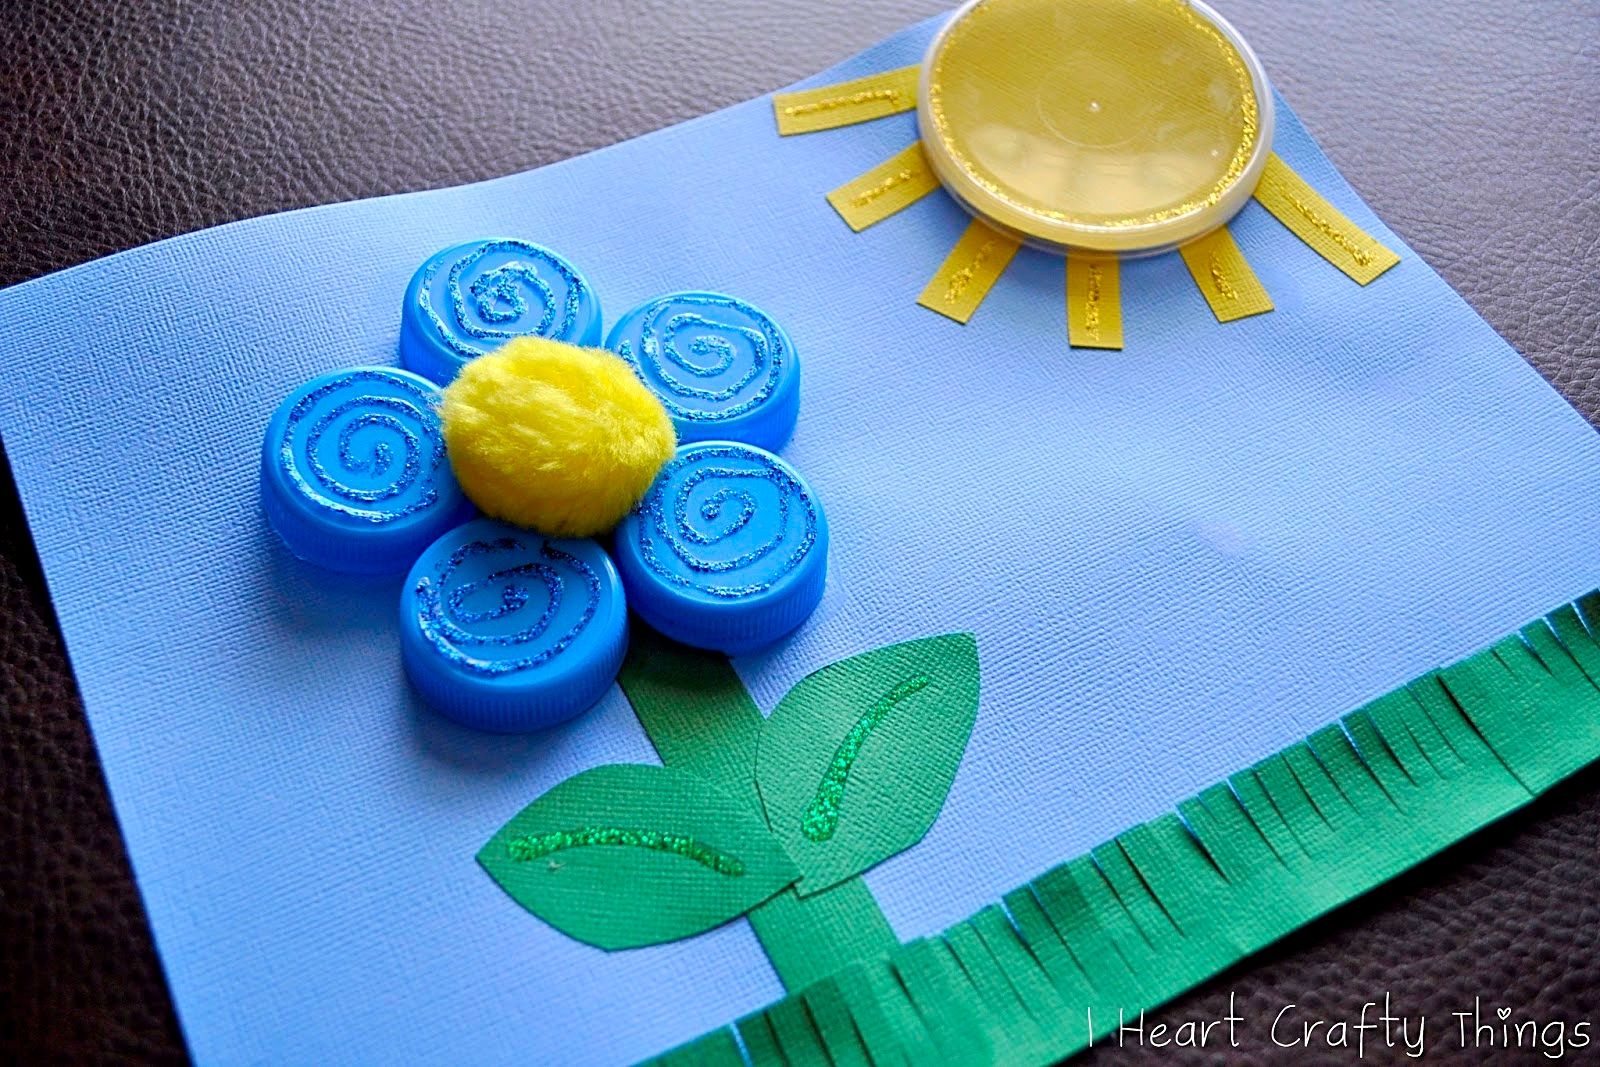 Fun and easy Easter crafts with household objects: Bottle Cap Flower by I Heart Crafty Things